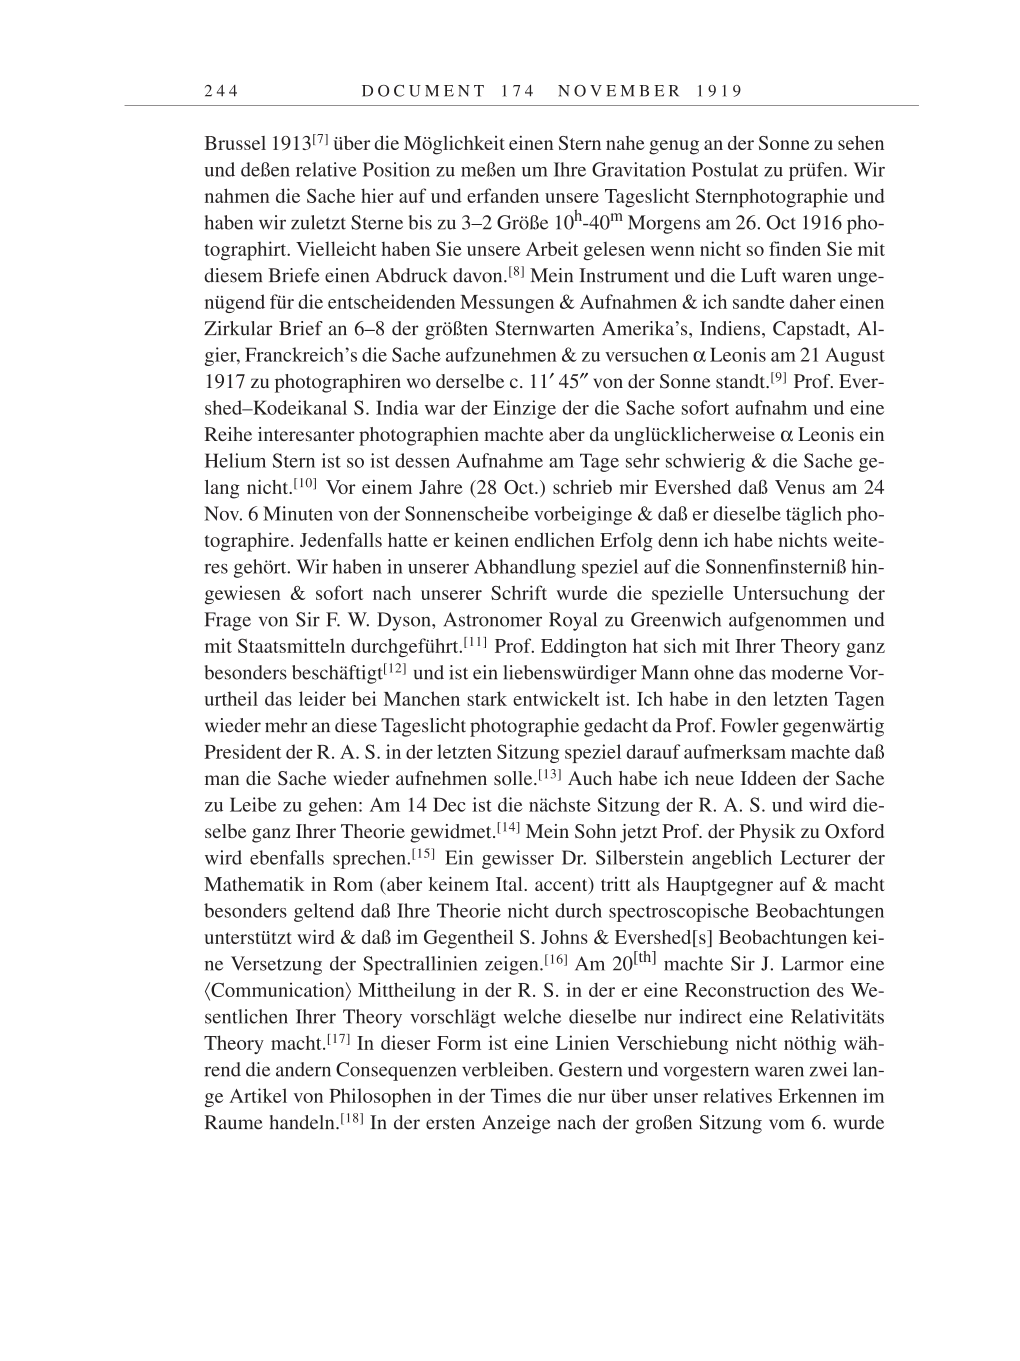 Volume 9: The Berlin Years: Correspondence January 1919-April 1920 page 244